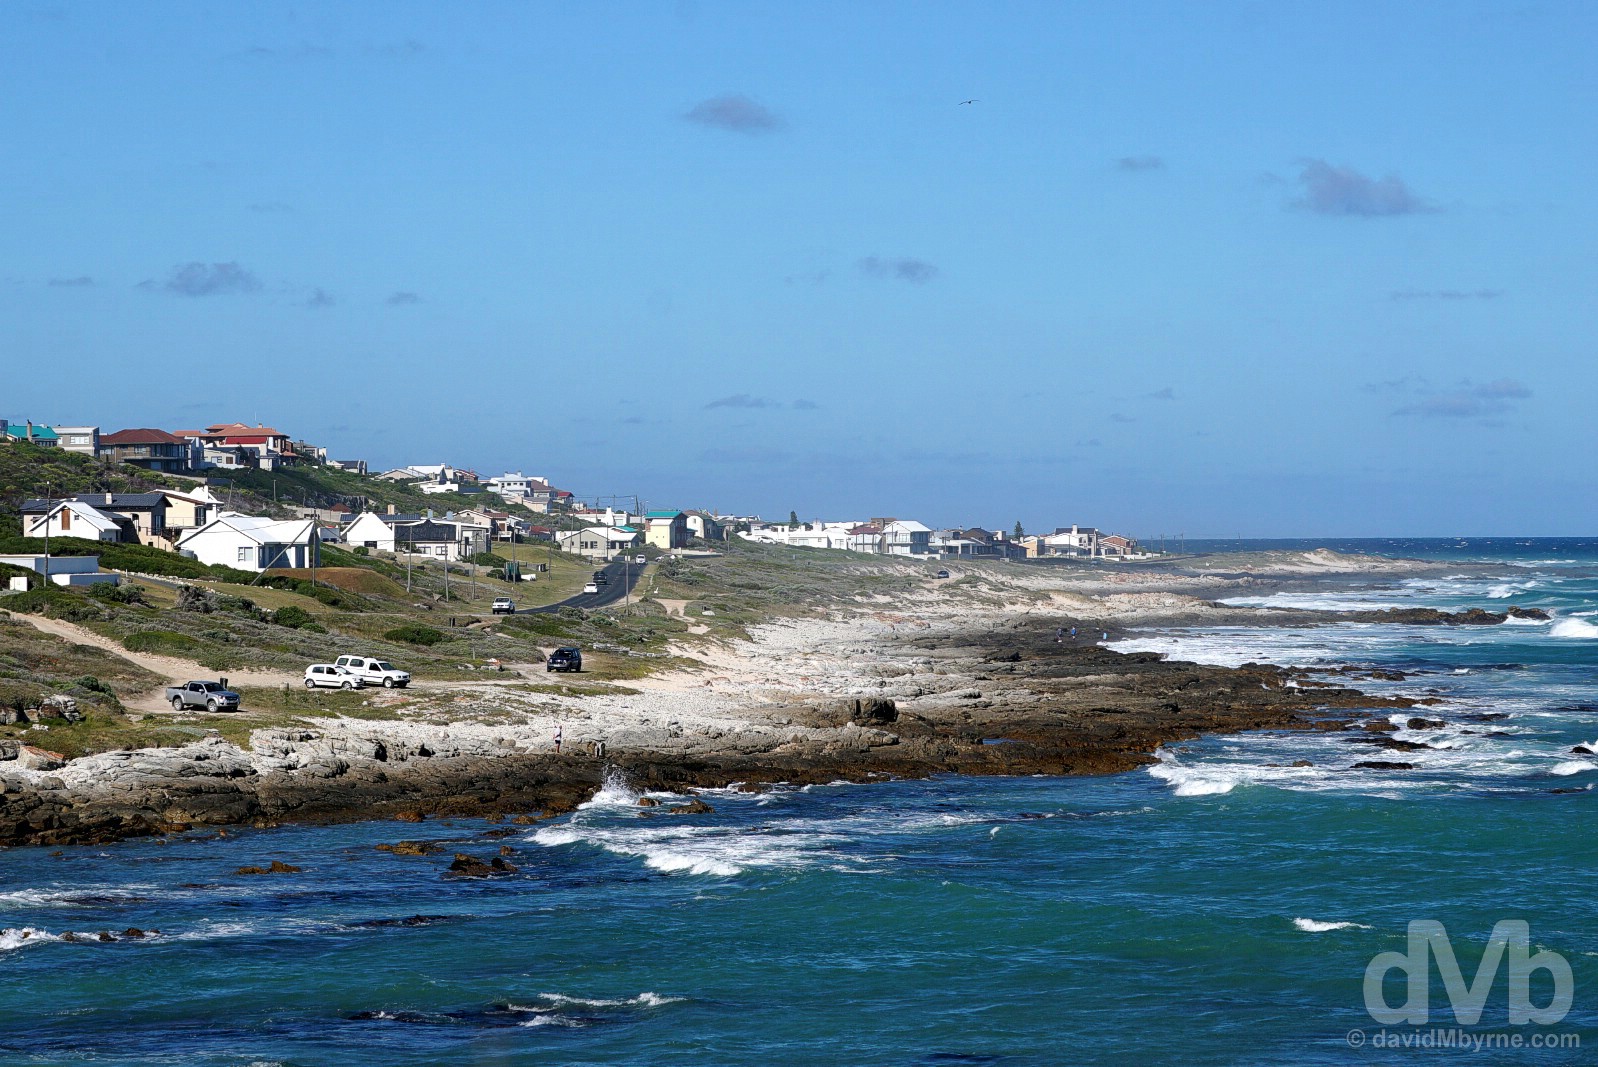 L’Agulhas, Overberg, Western Cape, South Africa. February 21, 2016.